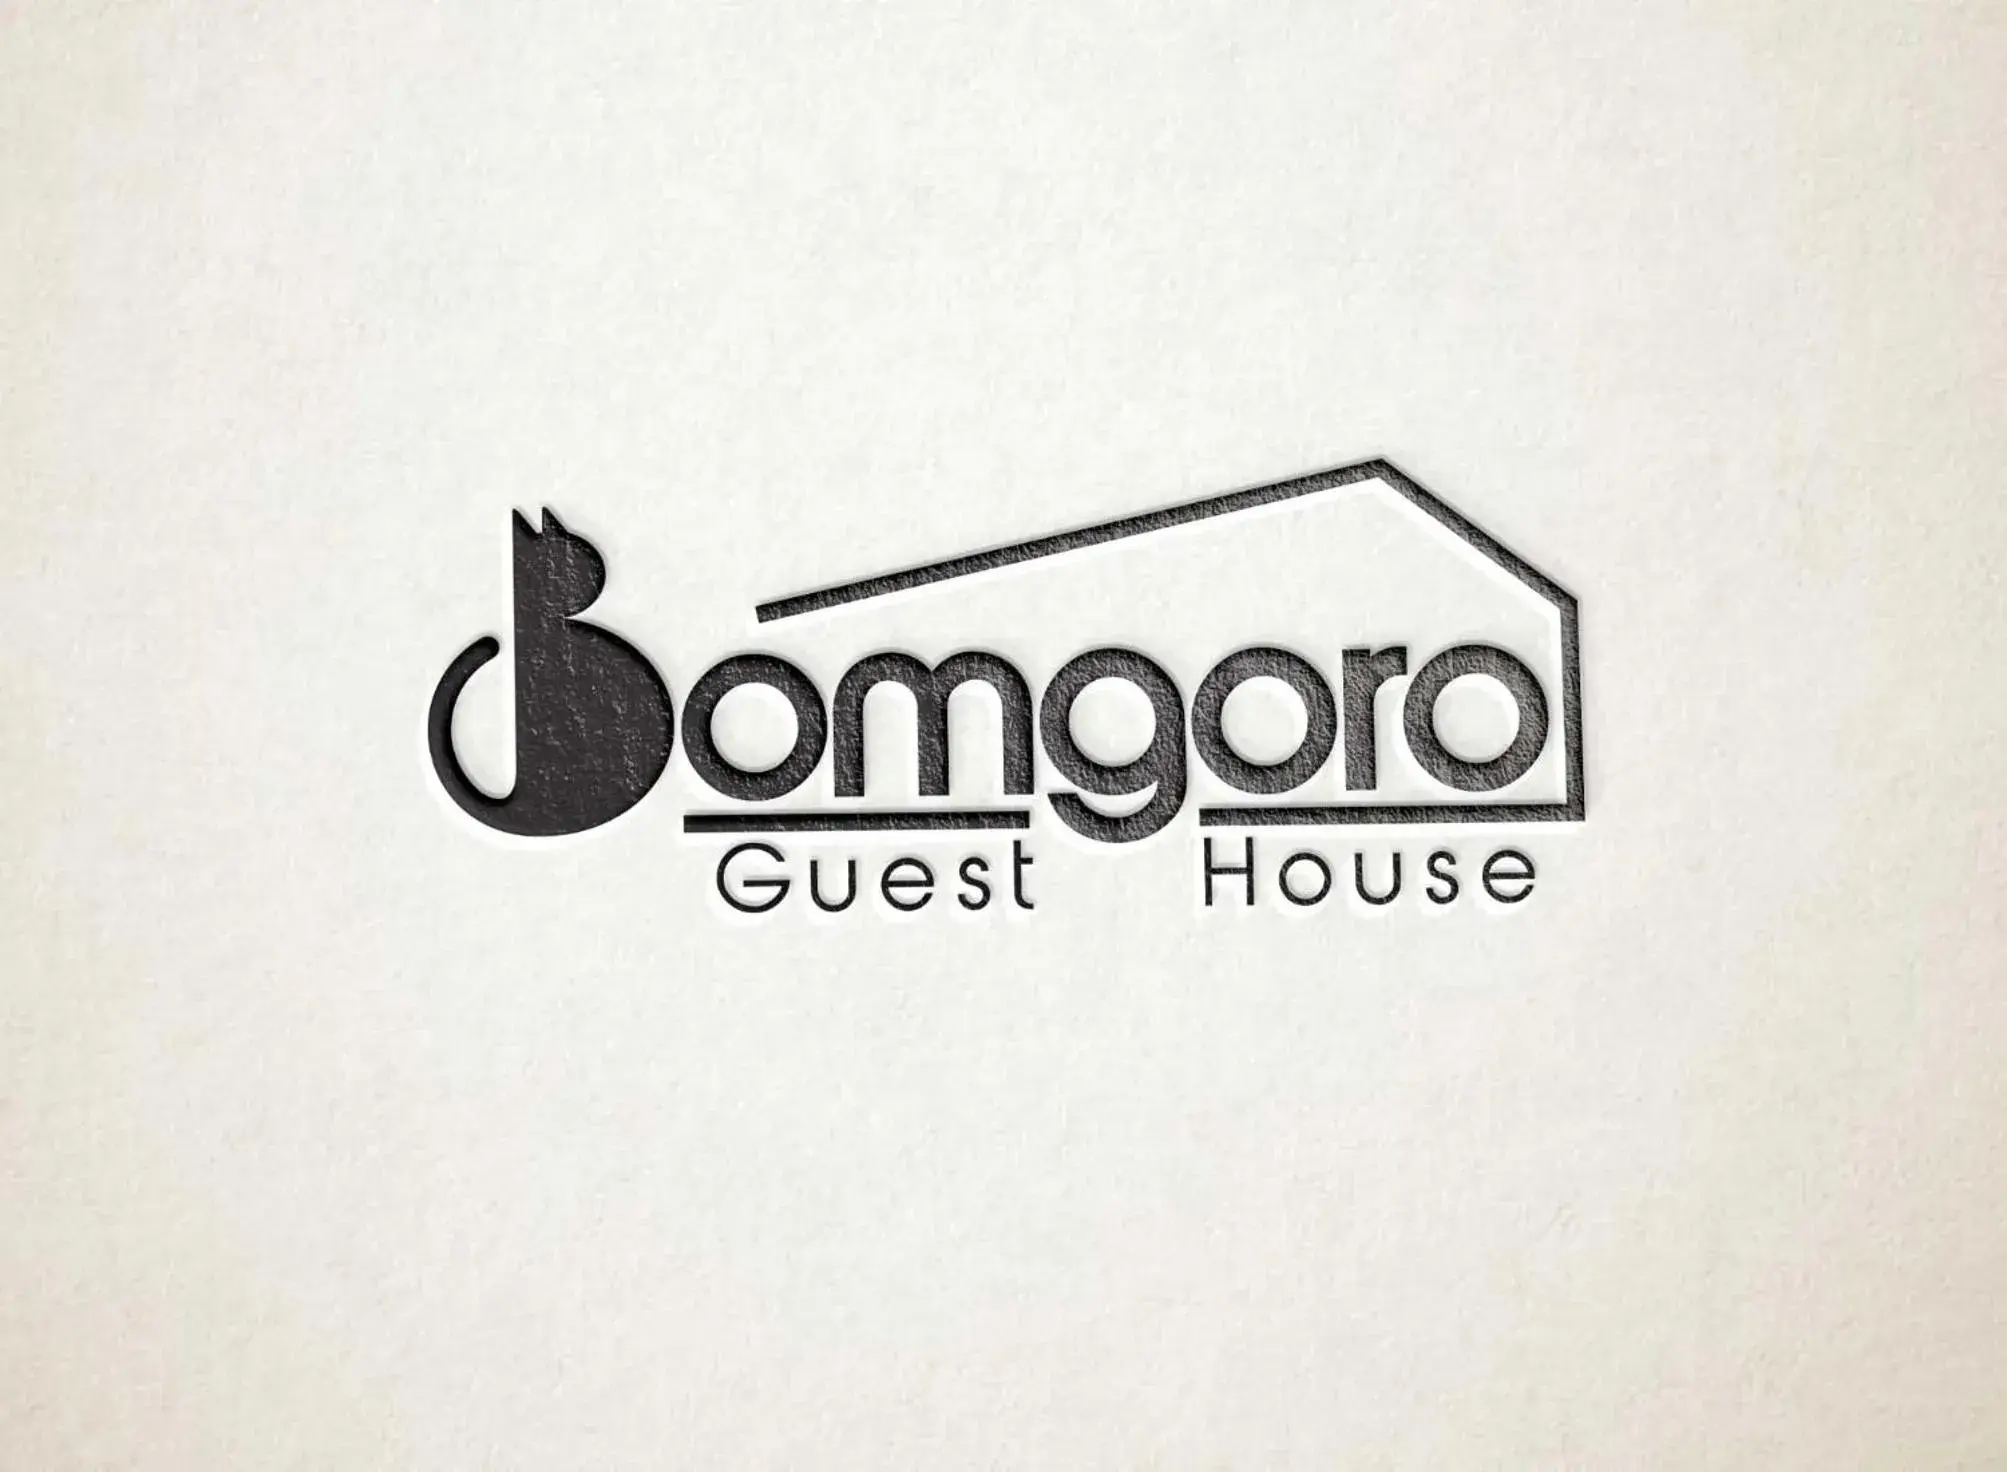 Property logo or sign in Bomgoro Guesthouse